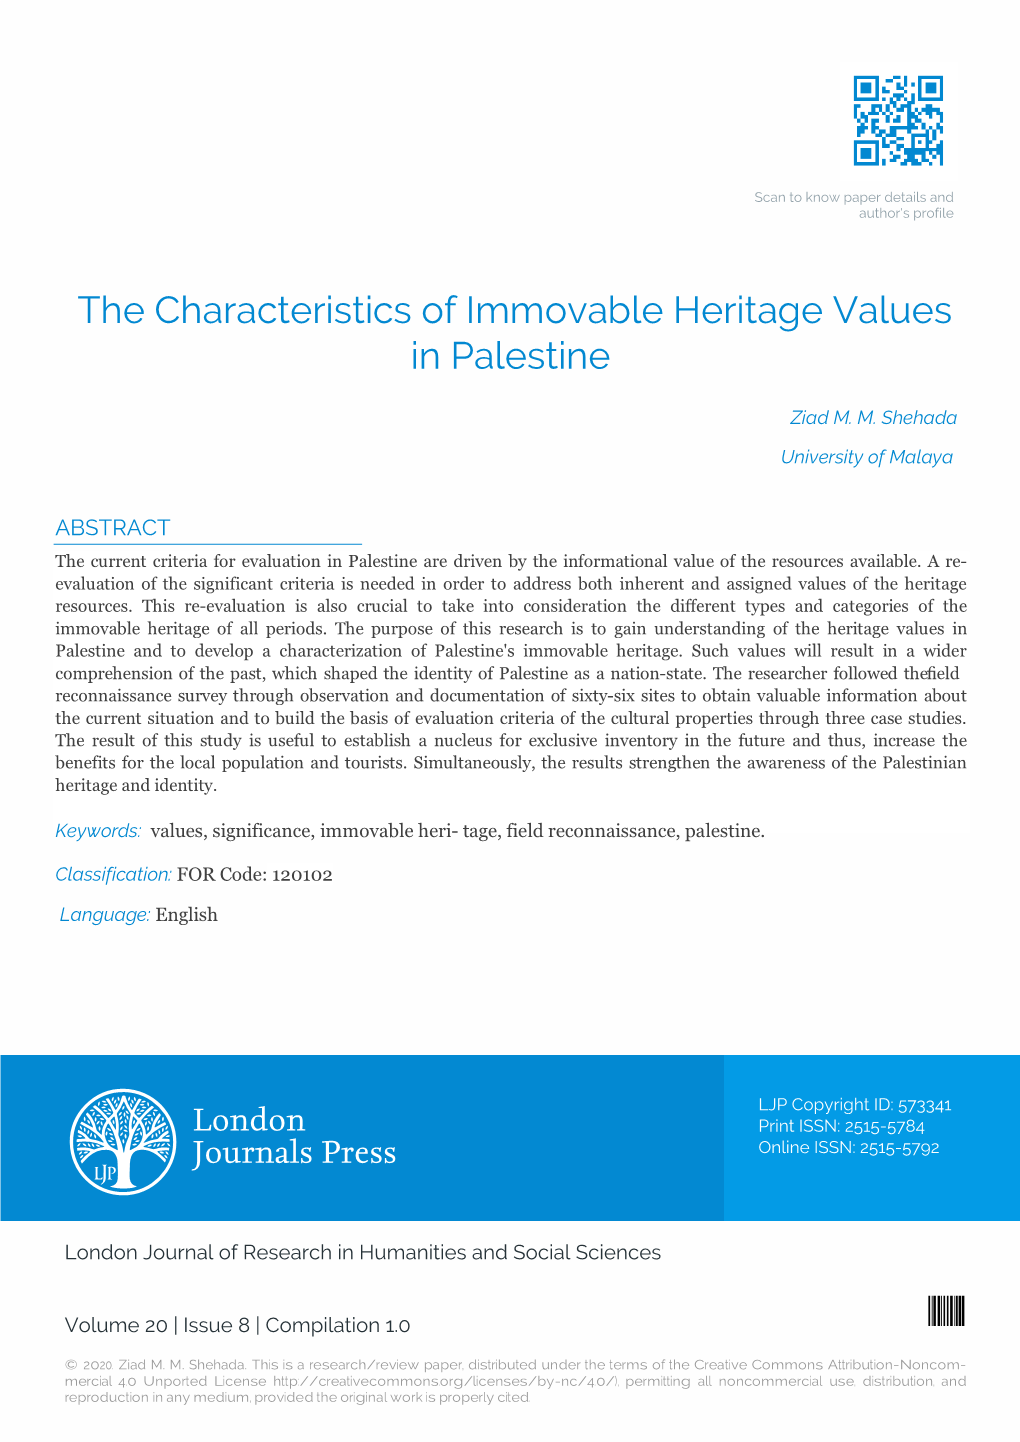 The Characteristics of Immovable Heritage Values in Palestine